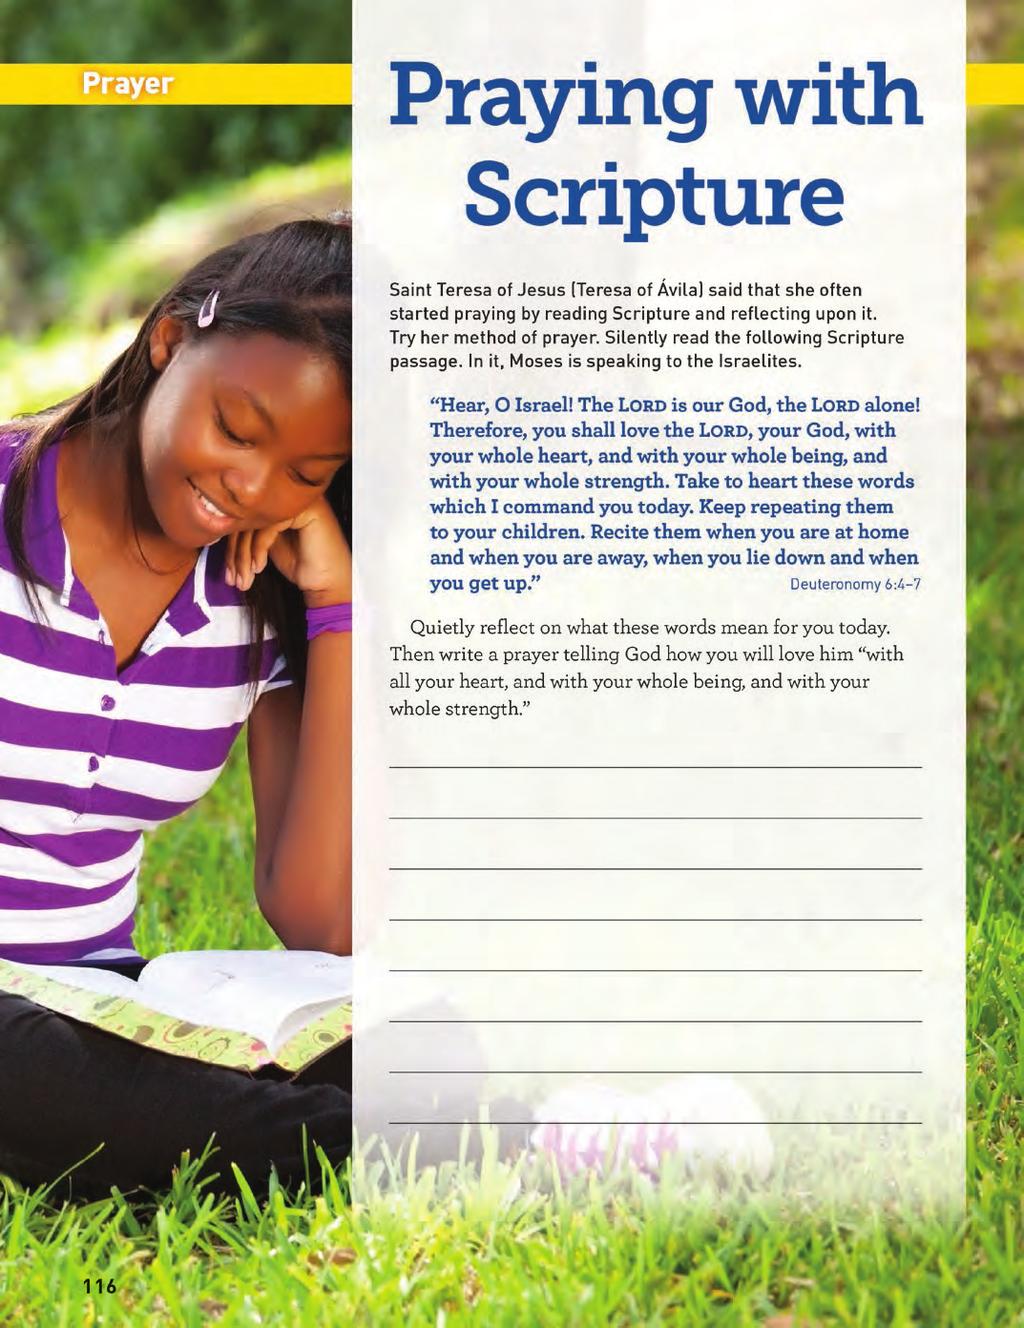 Grade 6 Prayer Page PRAYER PAGES The prayer pages at the end of each chapter provide students with a wide